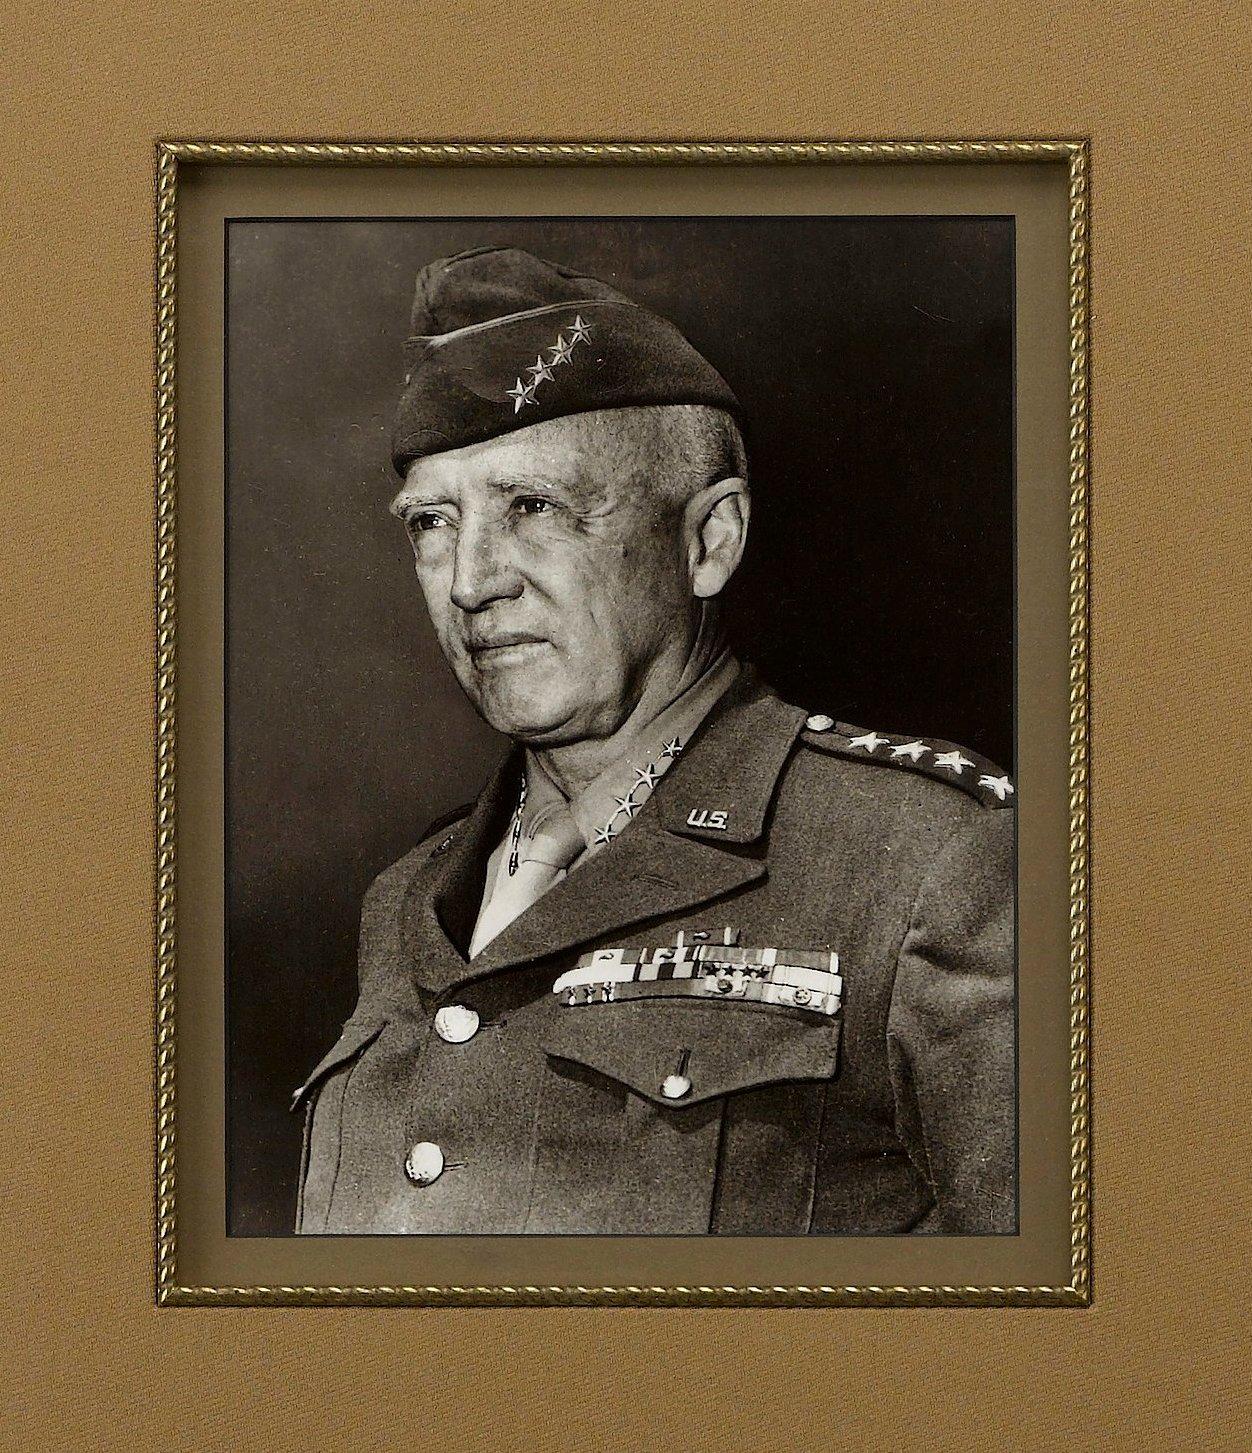 This unique collage celebrates General George S. Patton Jr. A senior officer of the U.S. Army, Patton is best known for his aggressive and capable leadership during WWII.

This is a twice-signed envelope addressed by Patton to his father, 